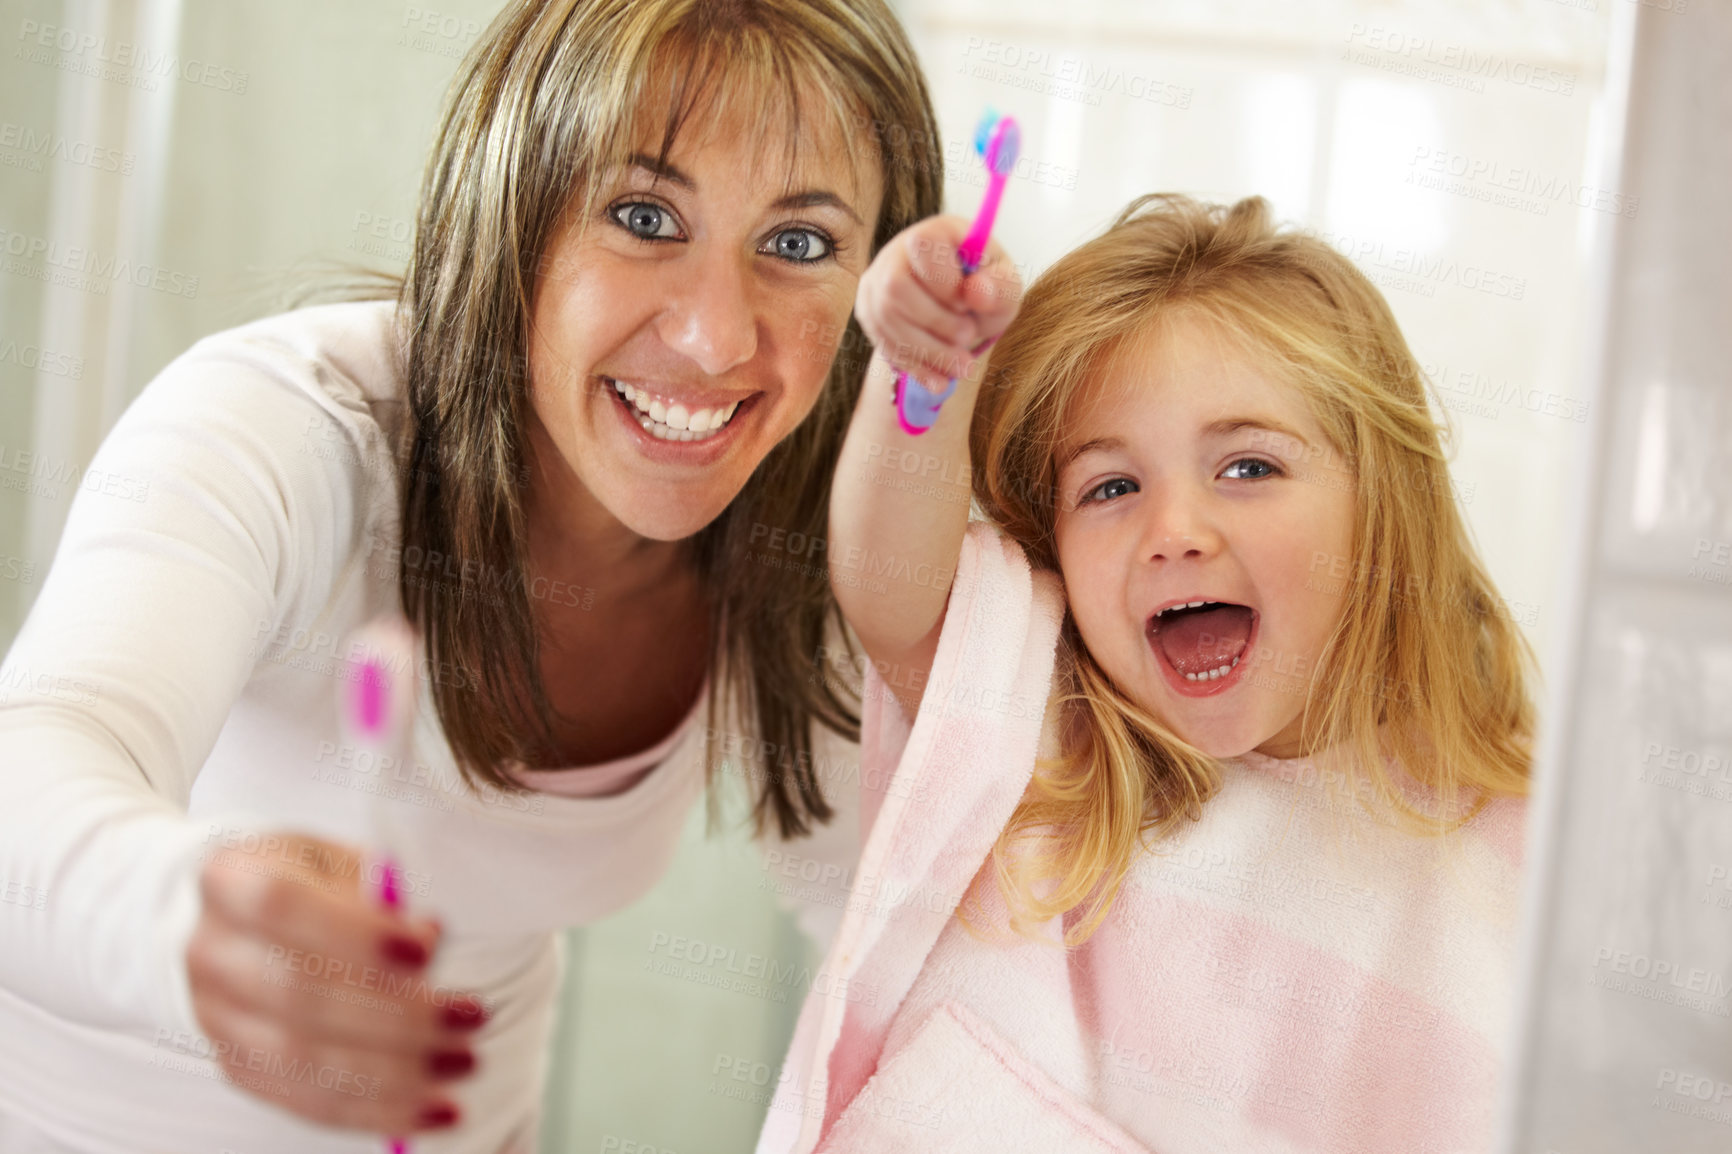 Buy stock photo Cute little girl getting ready to brush her teeth with her mom